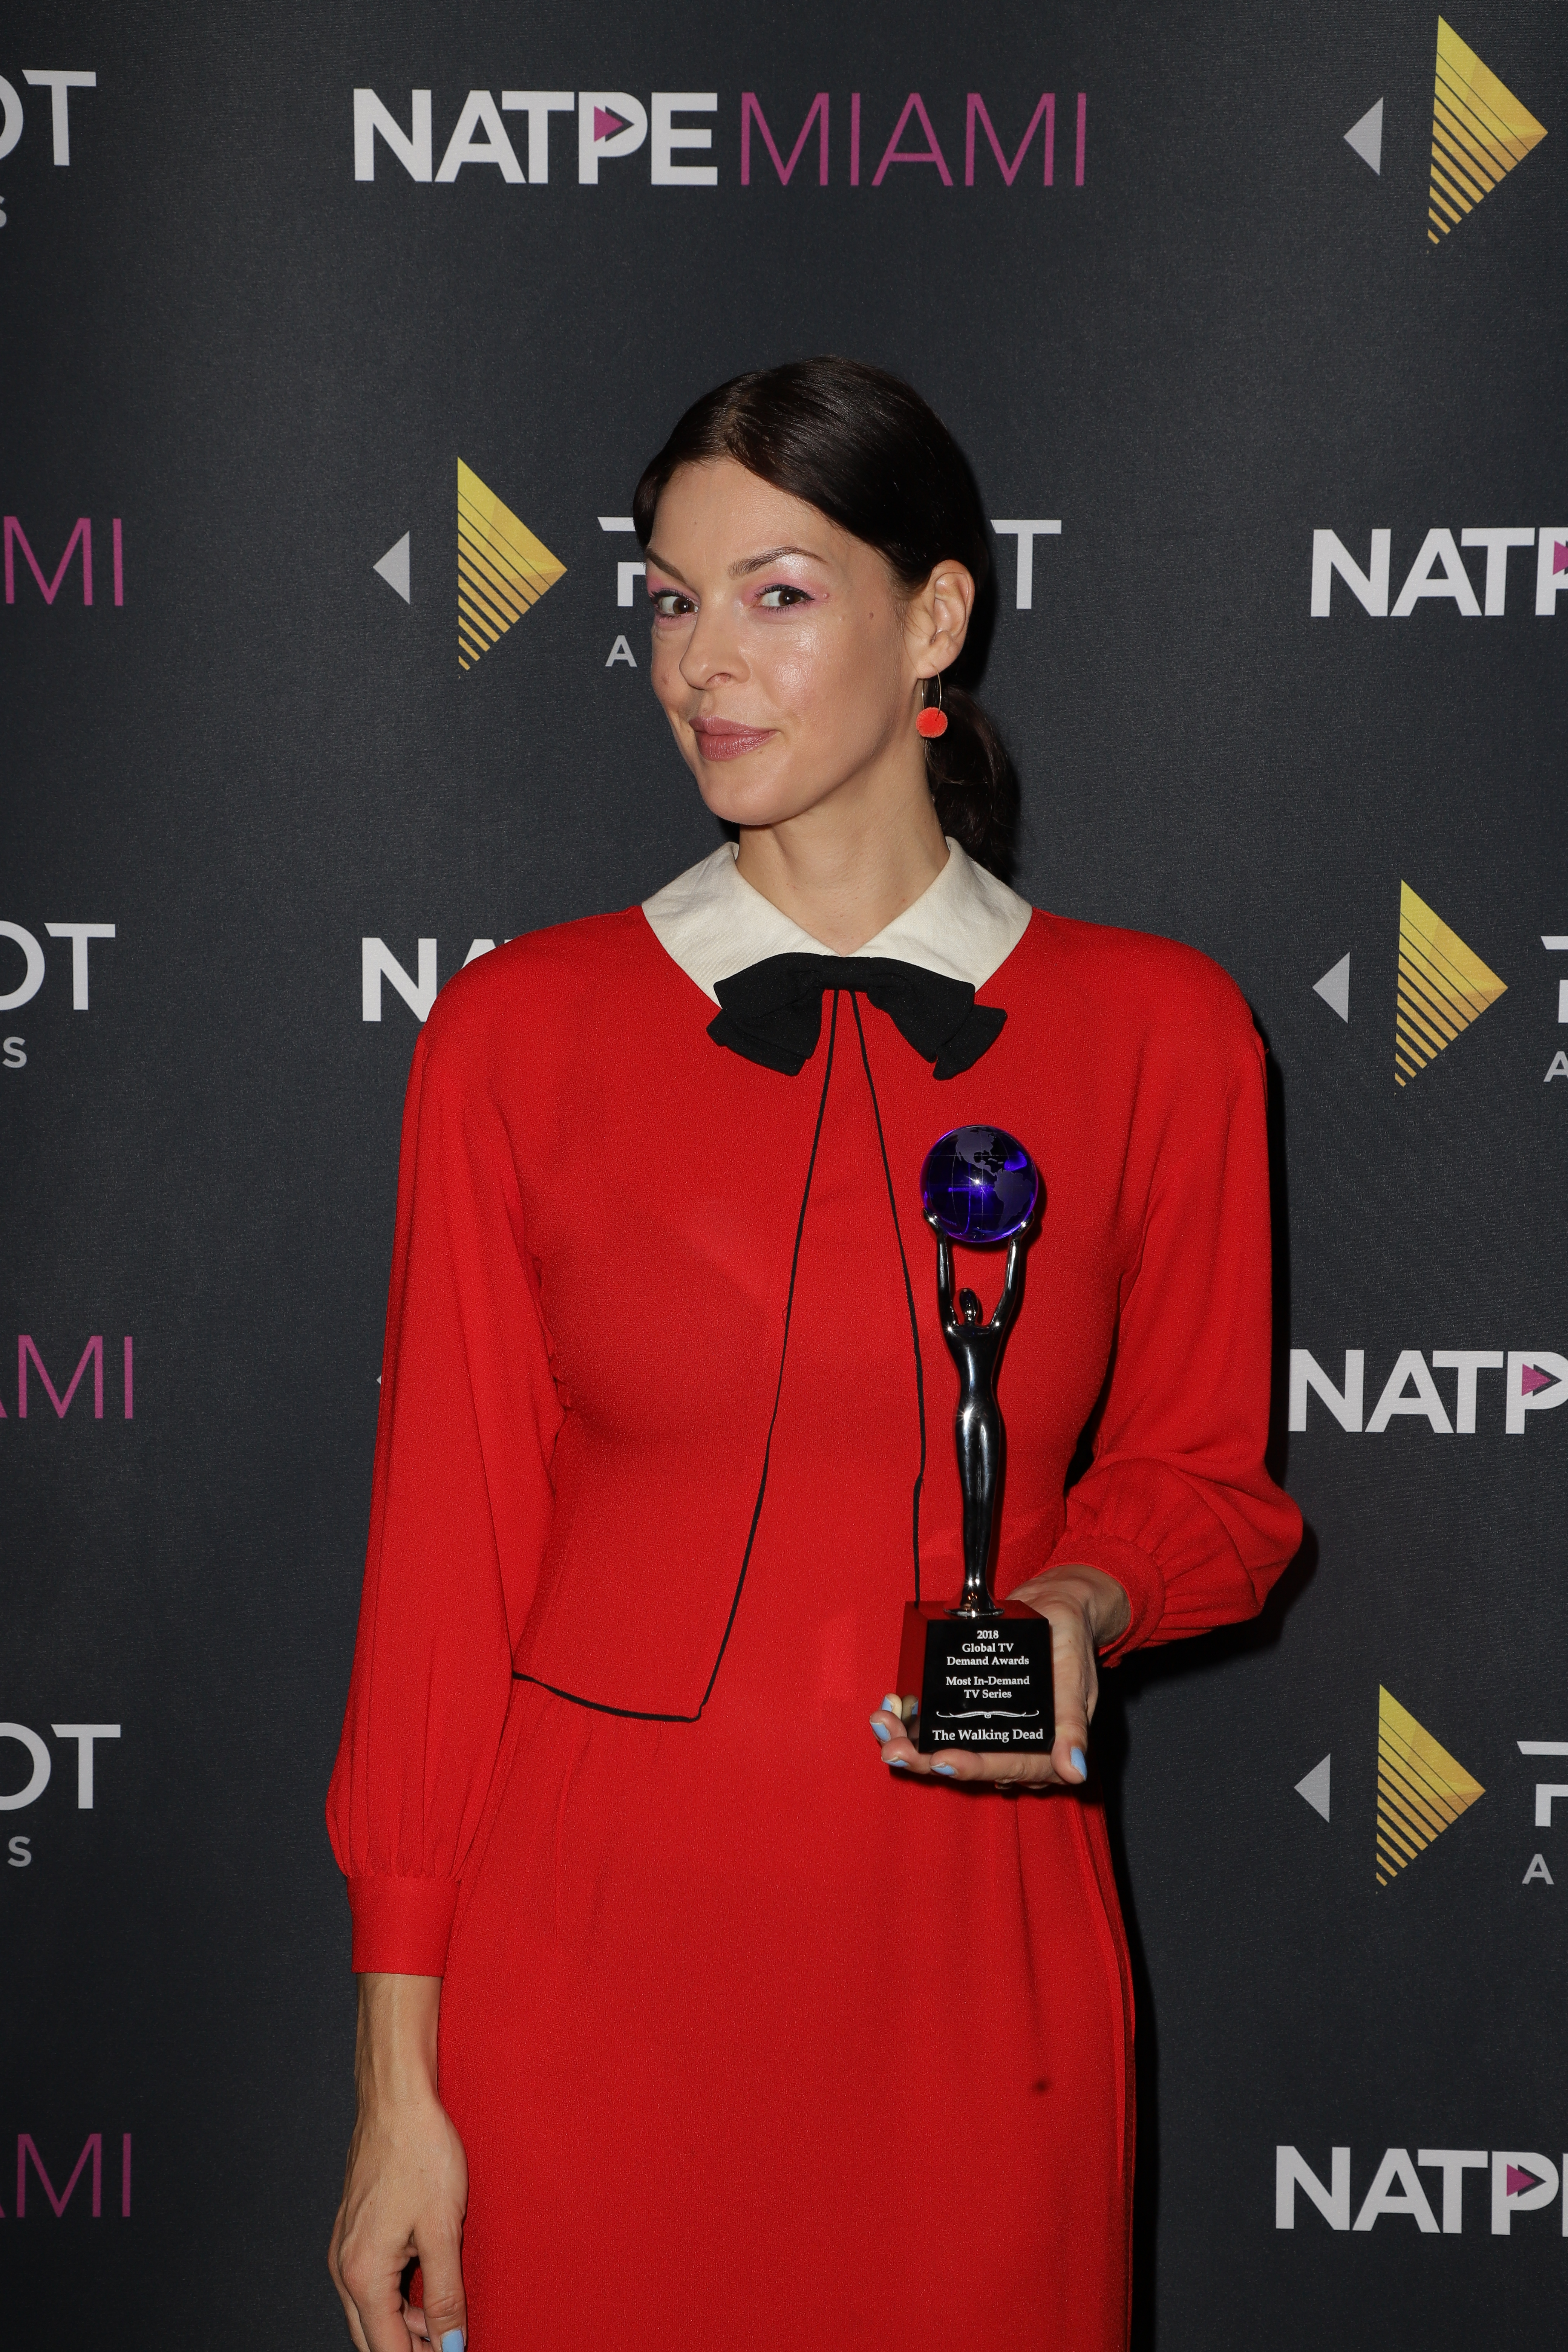 The Walking Dead actor Pollyanna McIntosh at the Global TV Demand Awards. (Photo by John Parra/Getty Images for Parrot Analytics)